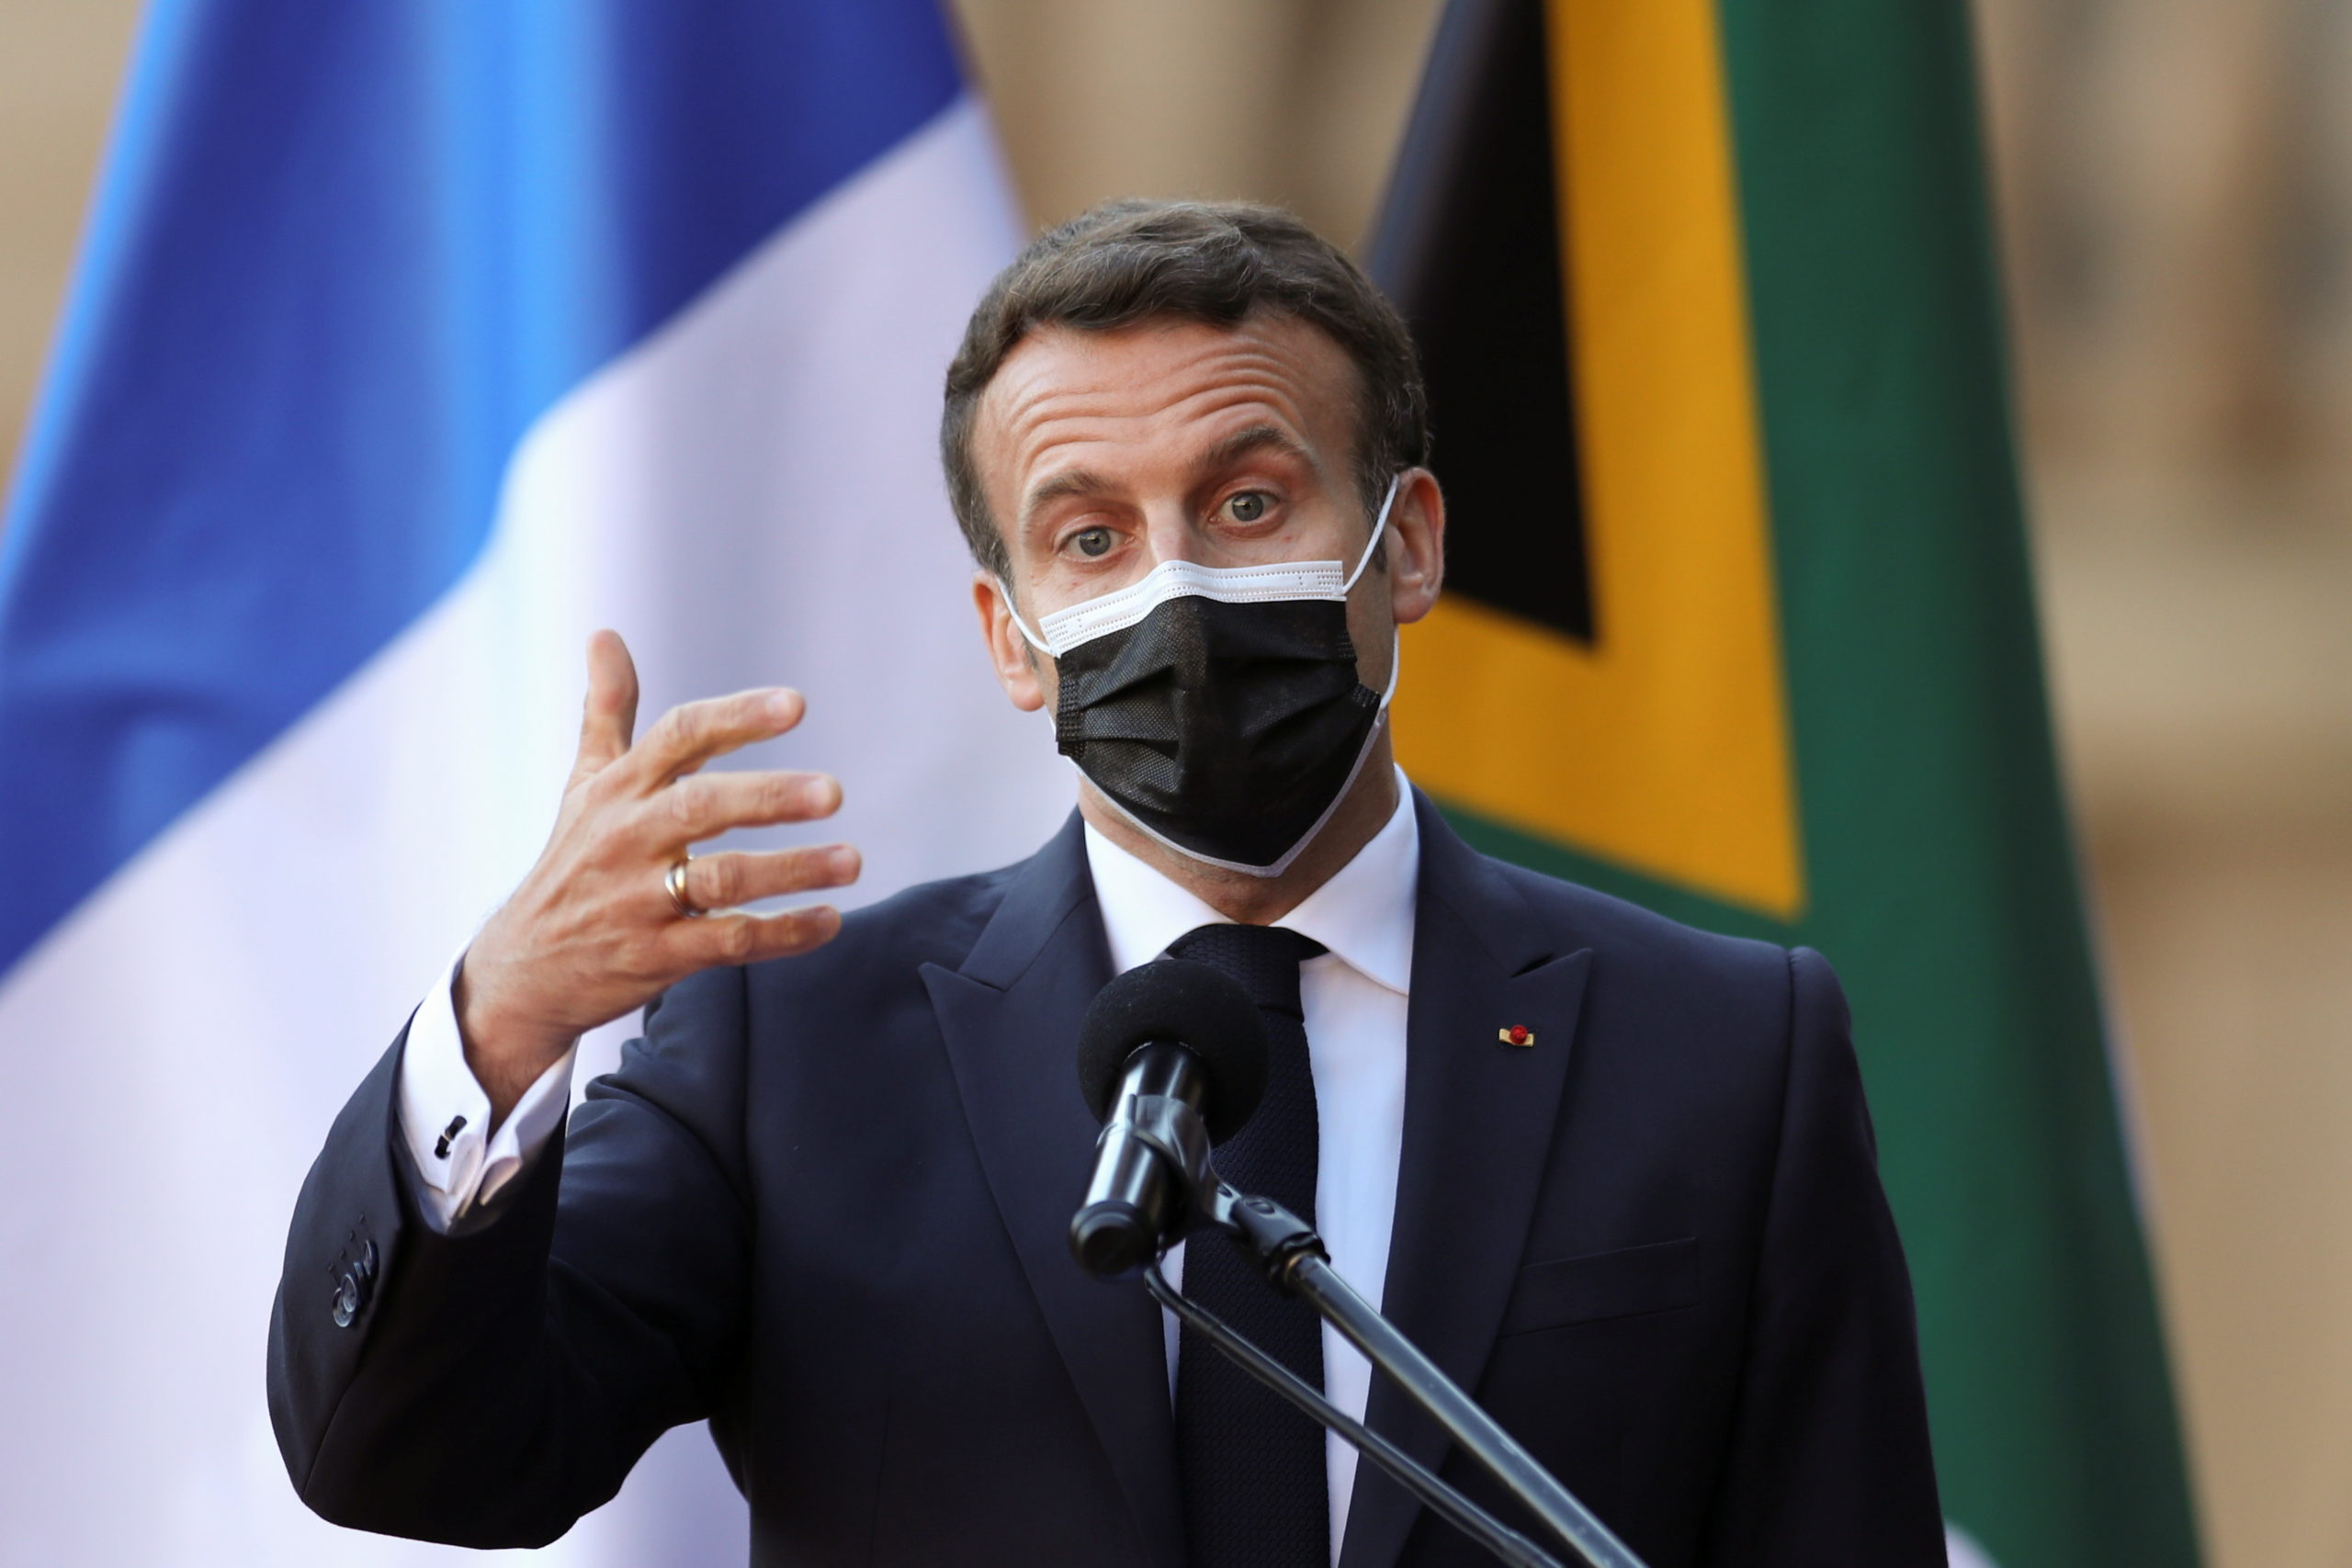 France Will Help Africa Make More COVID-19 Vaccines - Macron